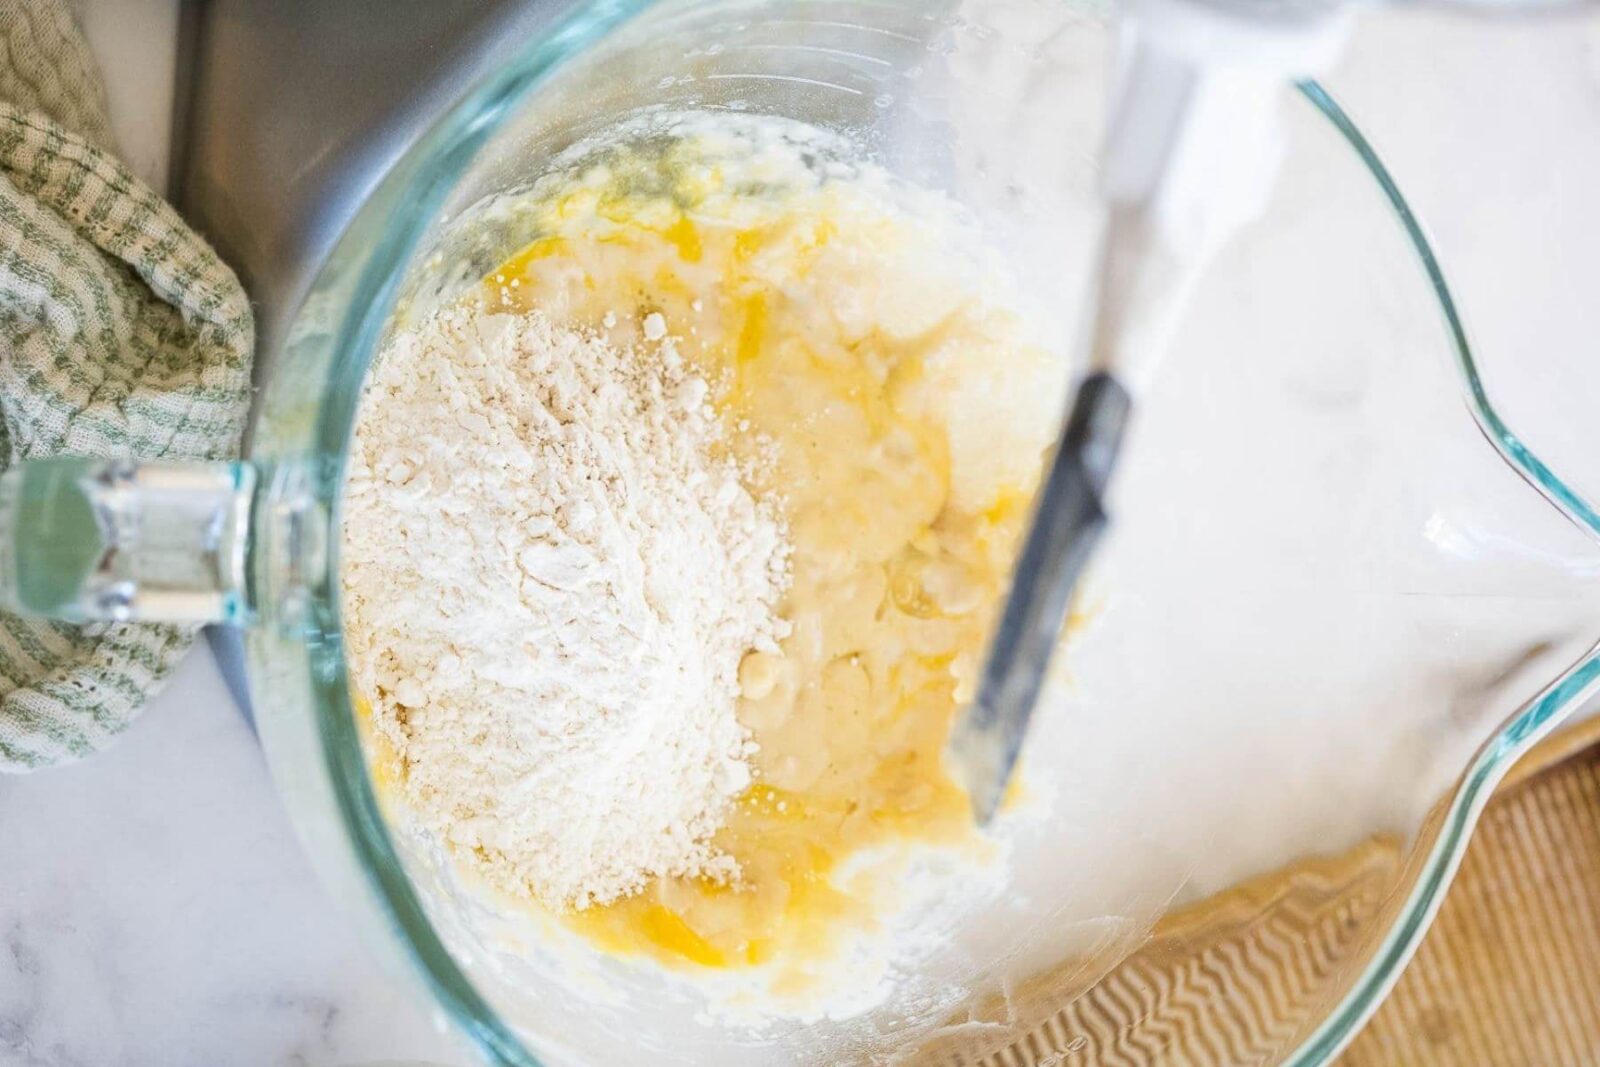 Flour sits on top of mixed dough ingredients in a glass mixing bowl.